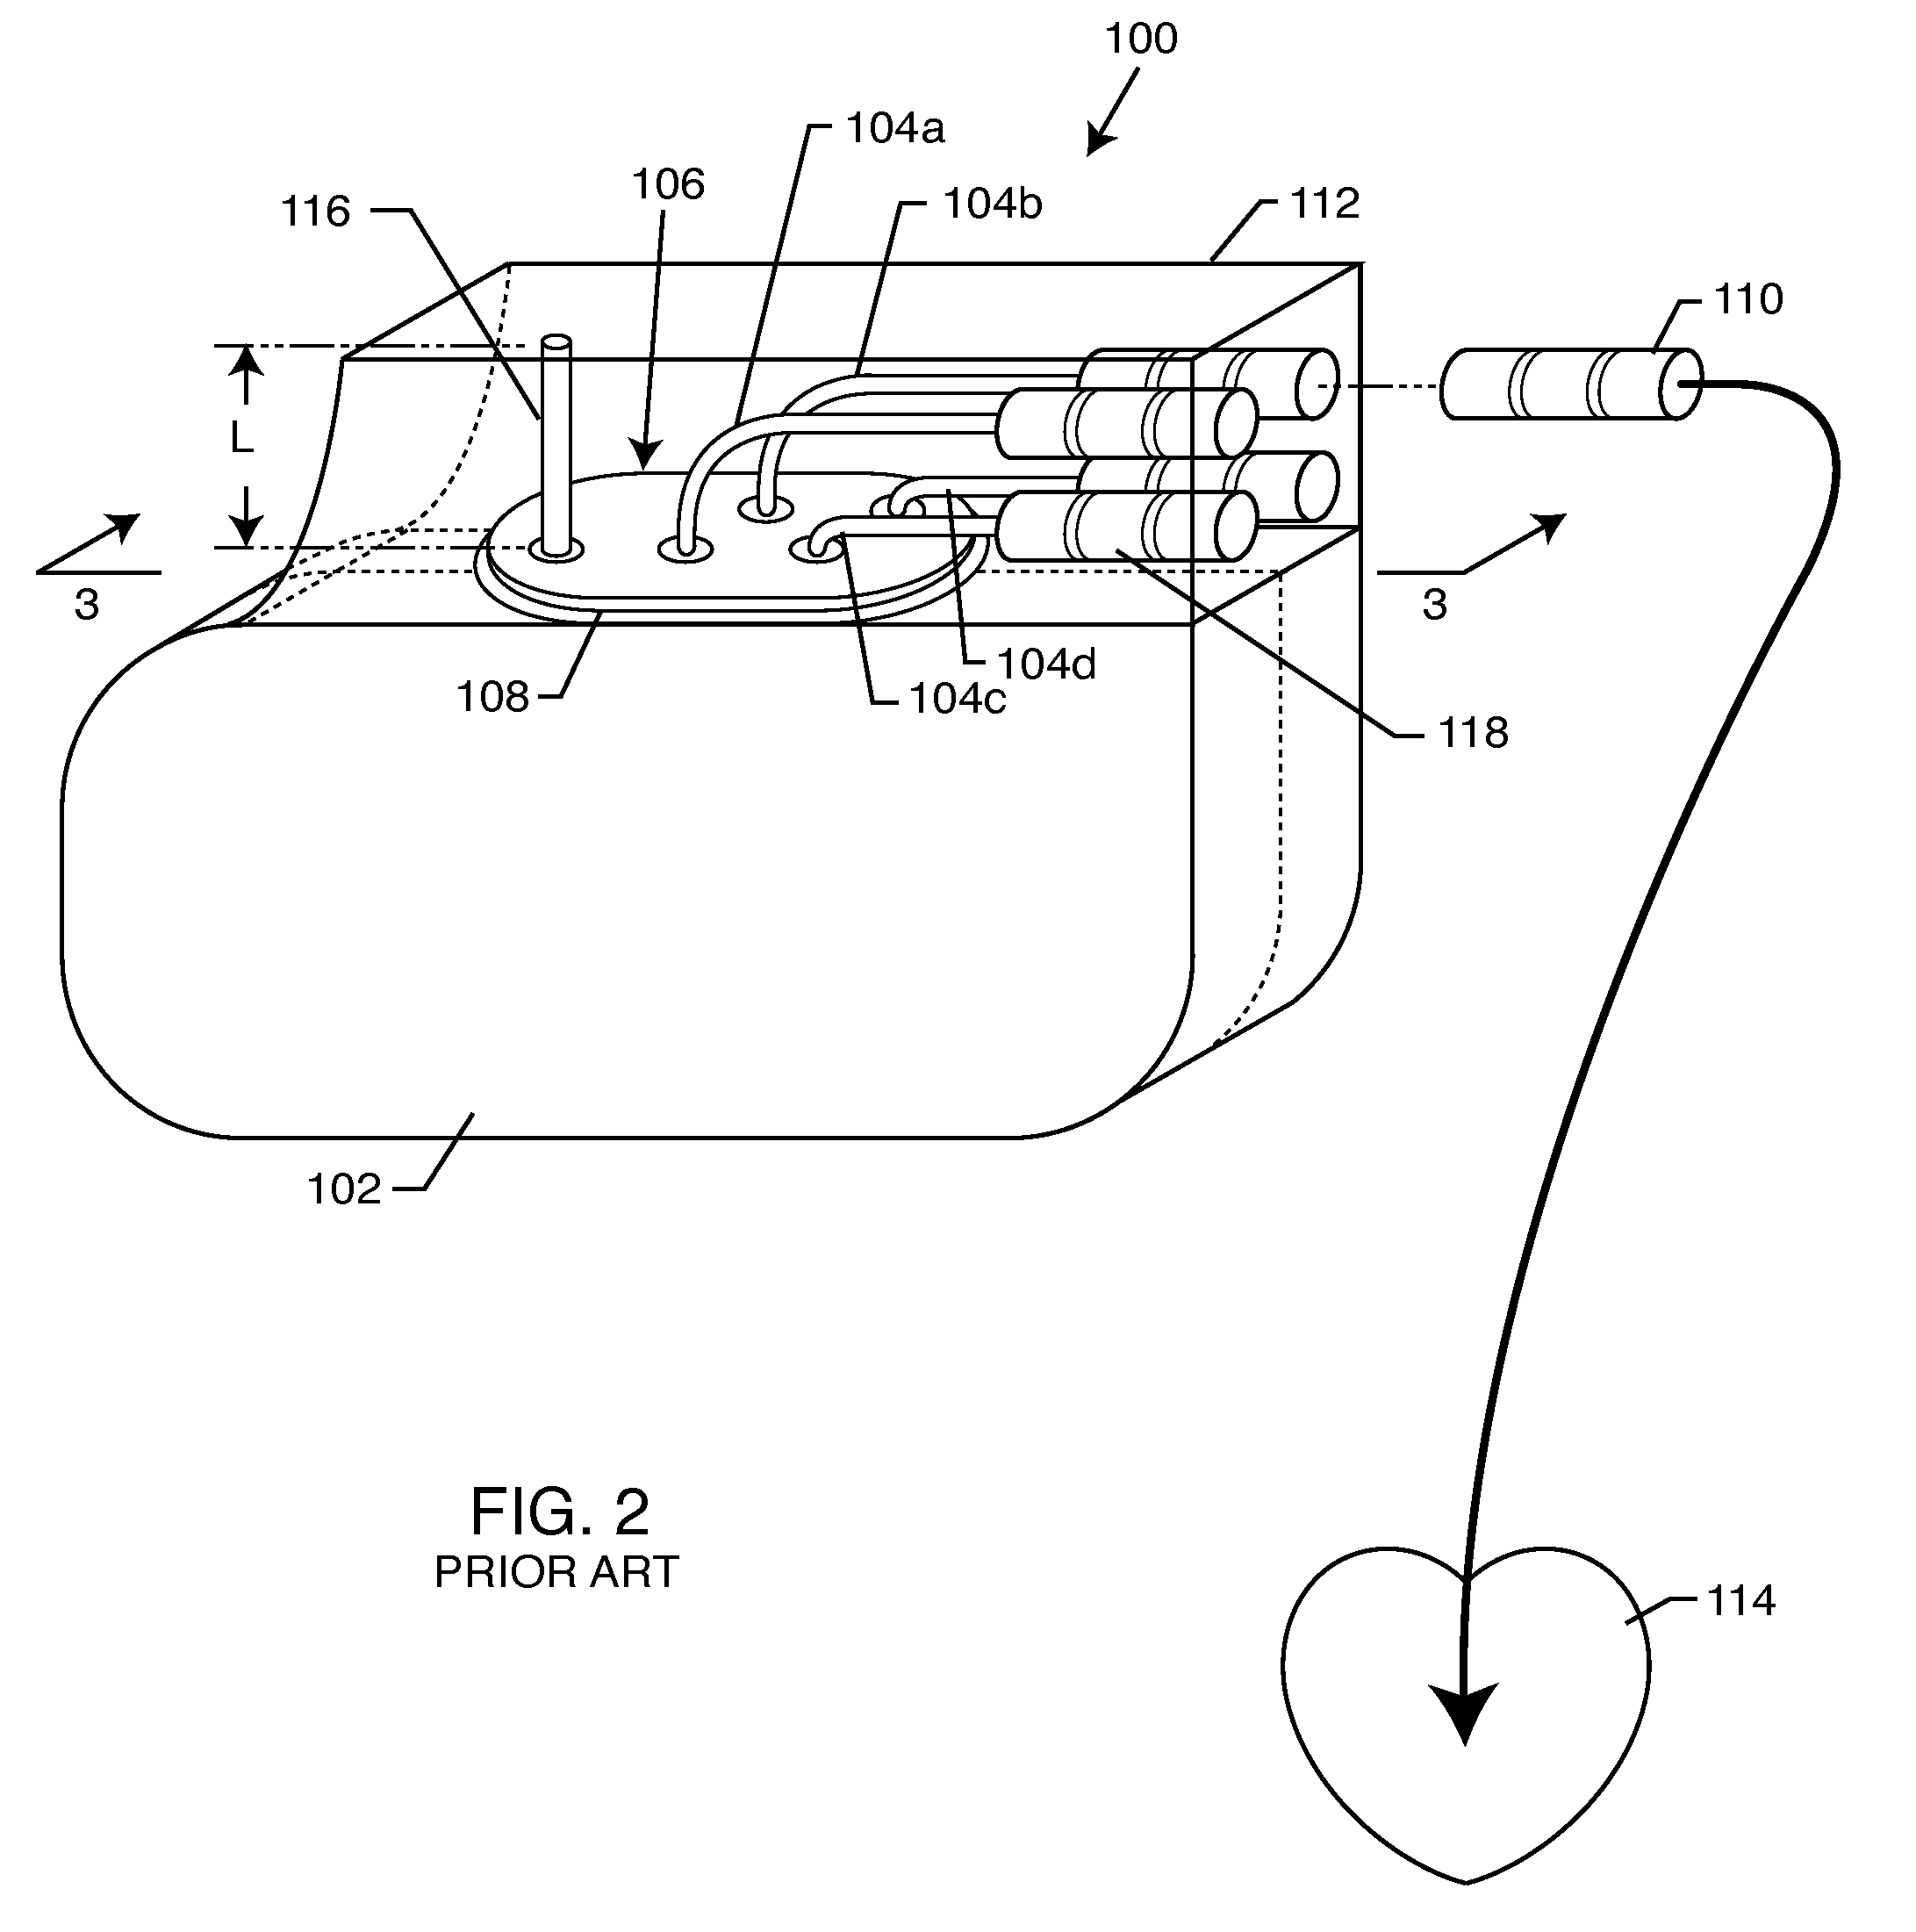 Band stop filter employing a capacitor and an inductor tank circuit to enhance MRI compatibility of active medical devices